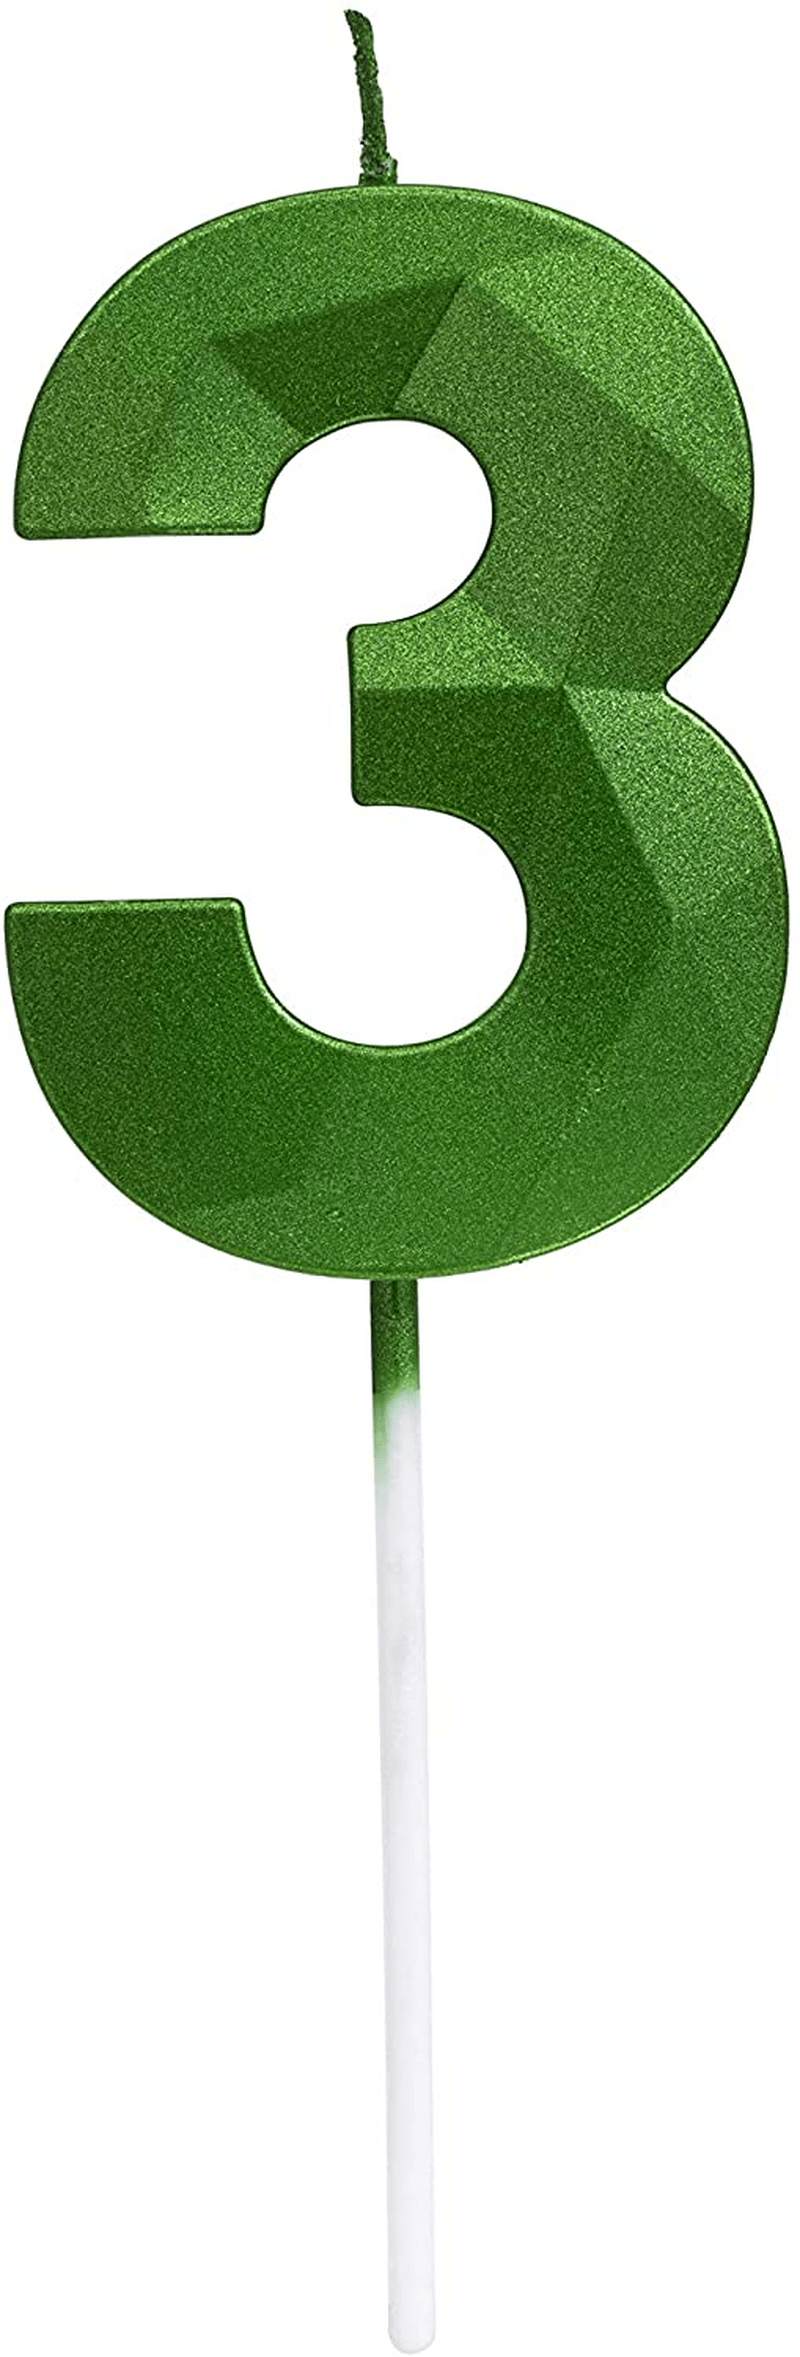 Black Happy Birthday Cake Candles,Wedding Cake Number Candles,3D Design Cake Topper Decoration for Party Kids Adults (Black, Number 0) Home & Garden > Decor > Home Fragrances > Candles MEIMEI Green number 3 